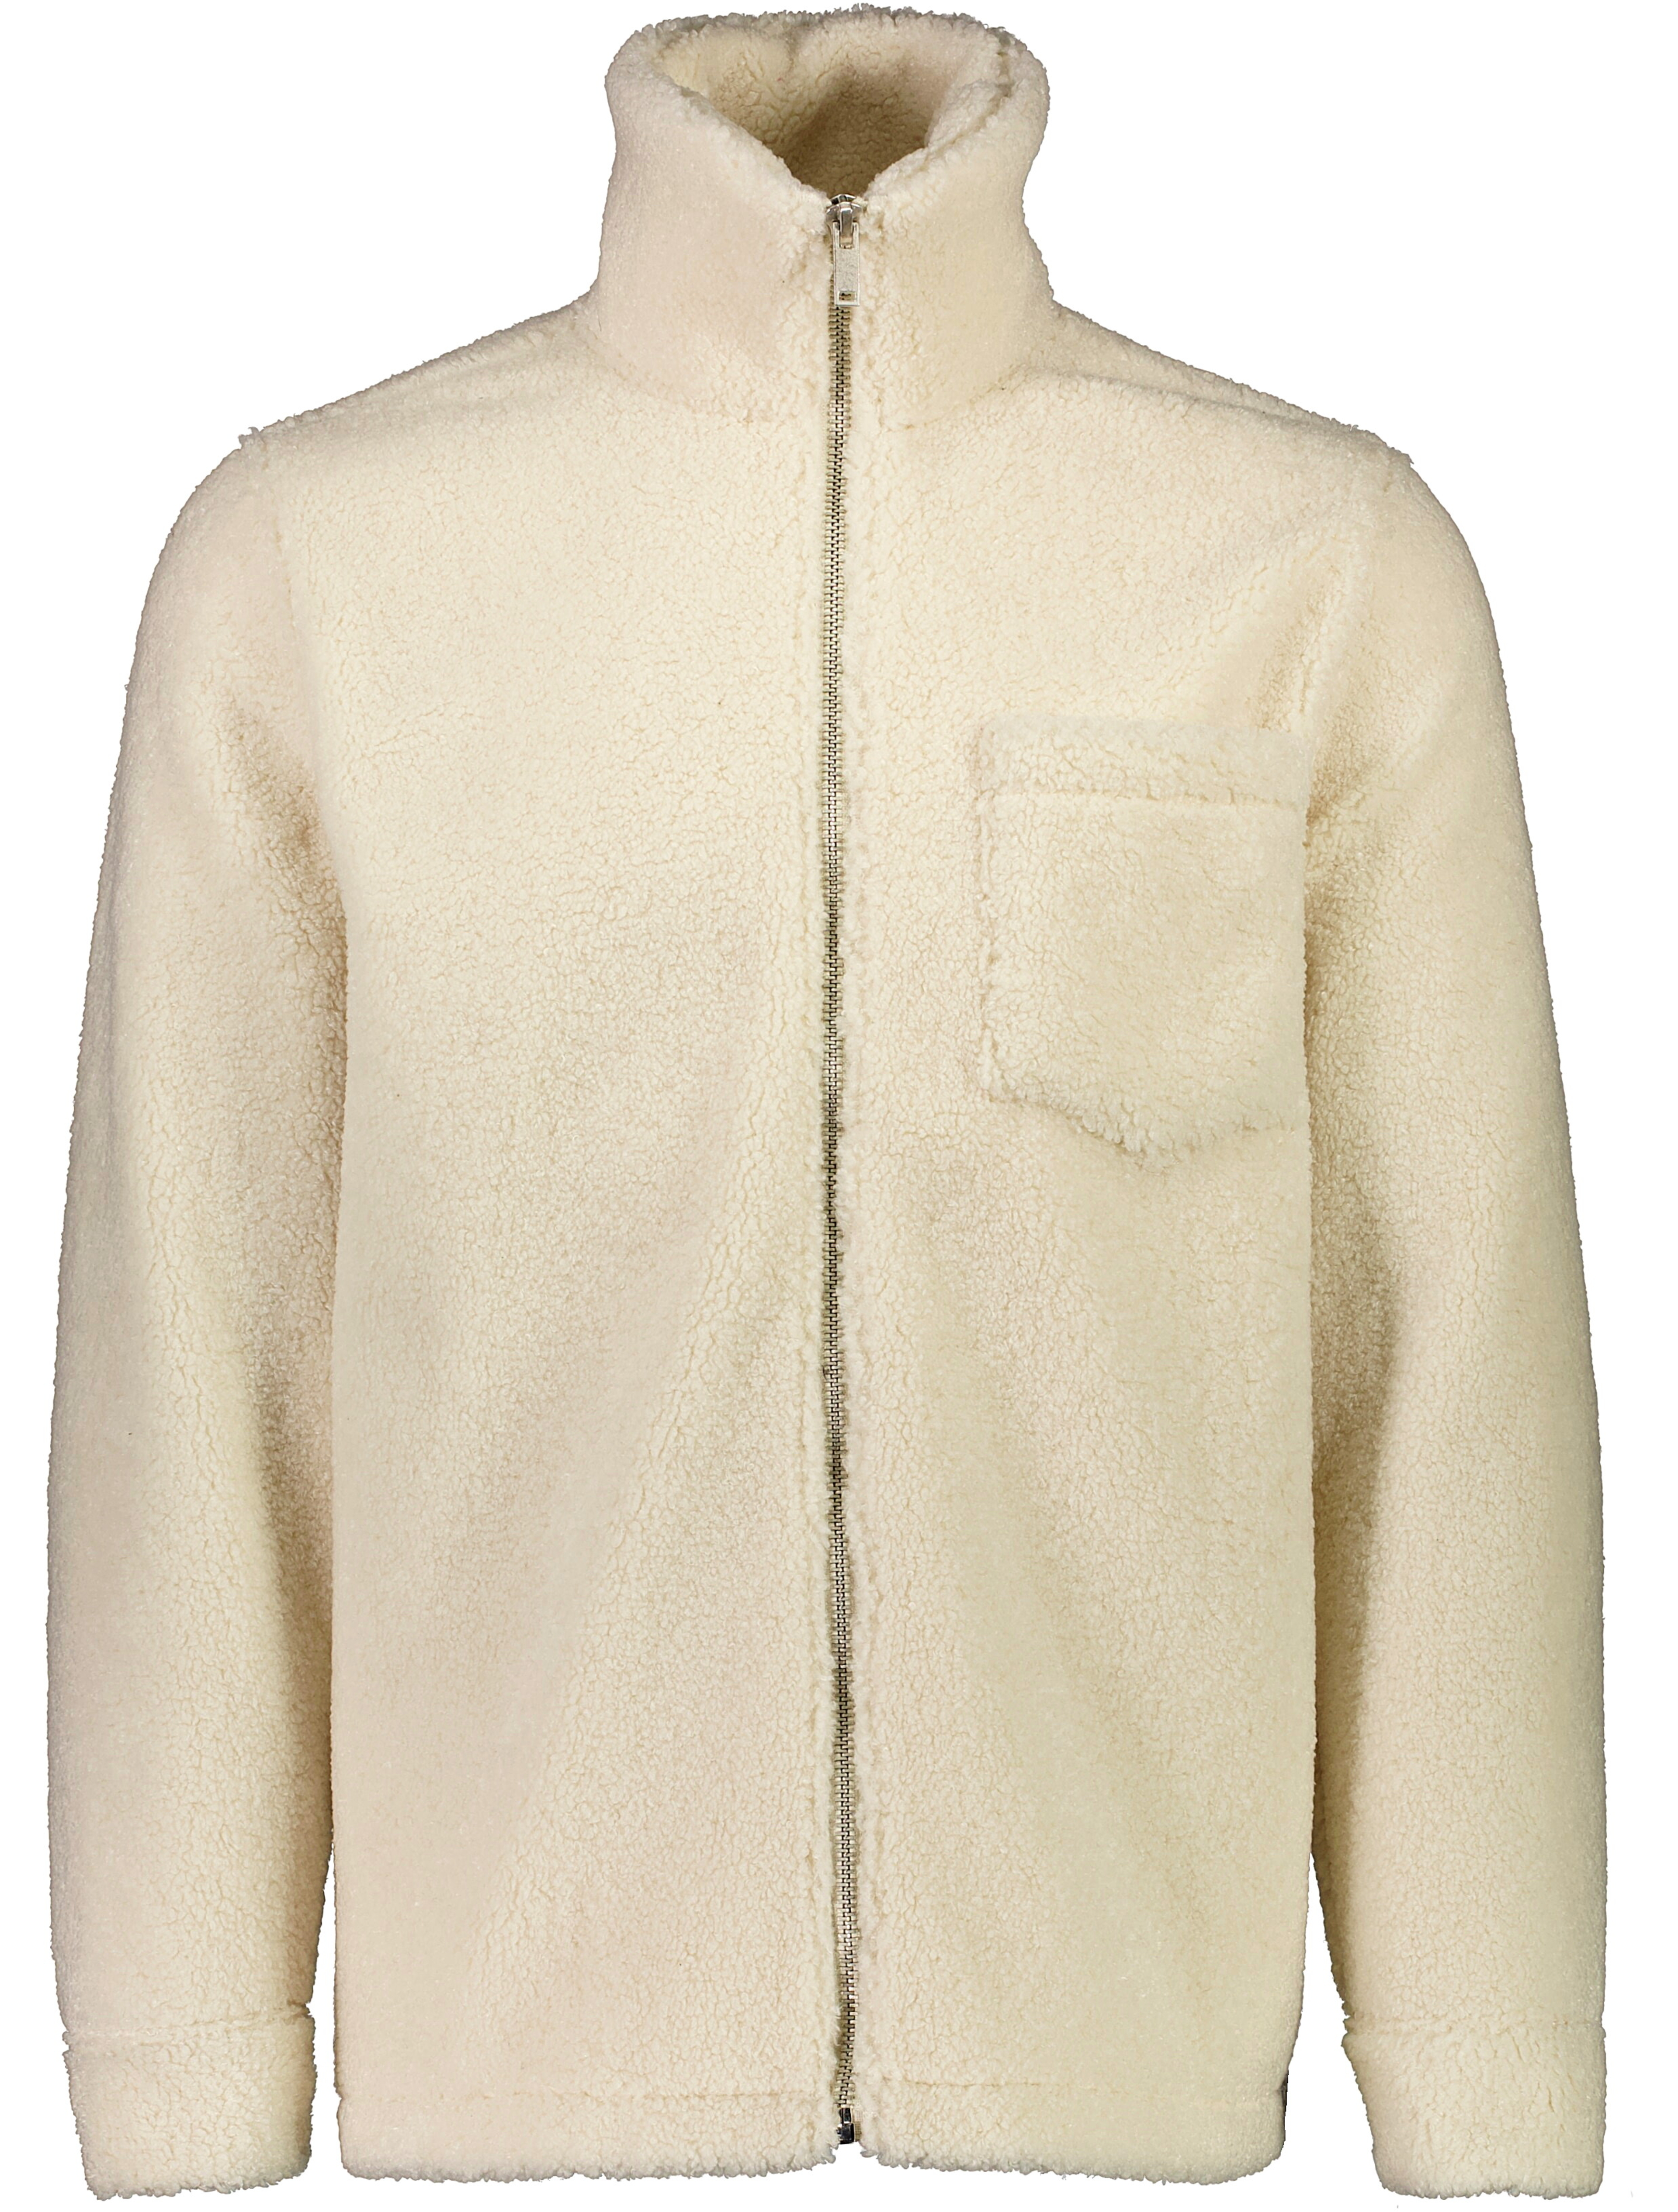 Lindbergh Casual jacket white / off white